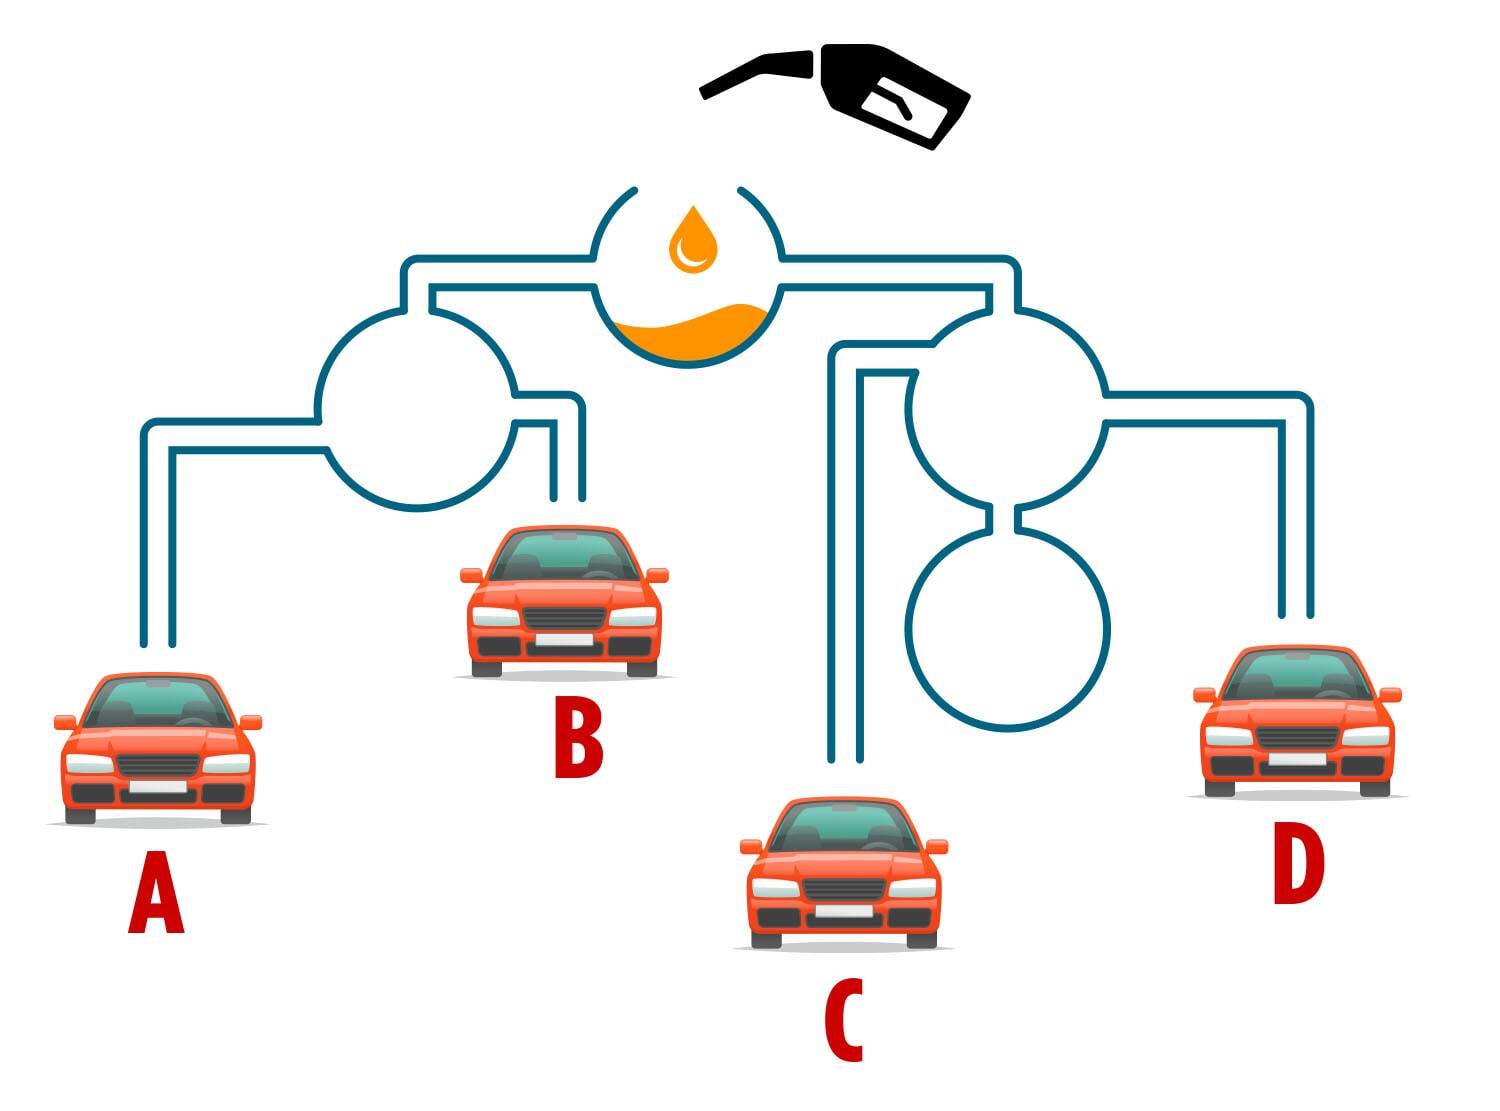 Only genius drivers can tell which of these four cars will get fuel first